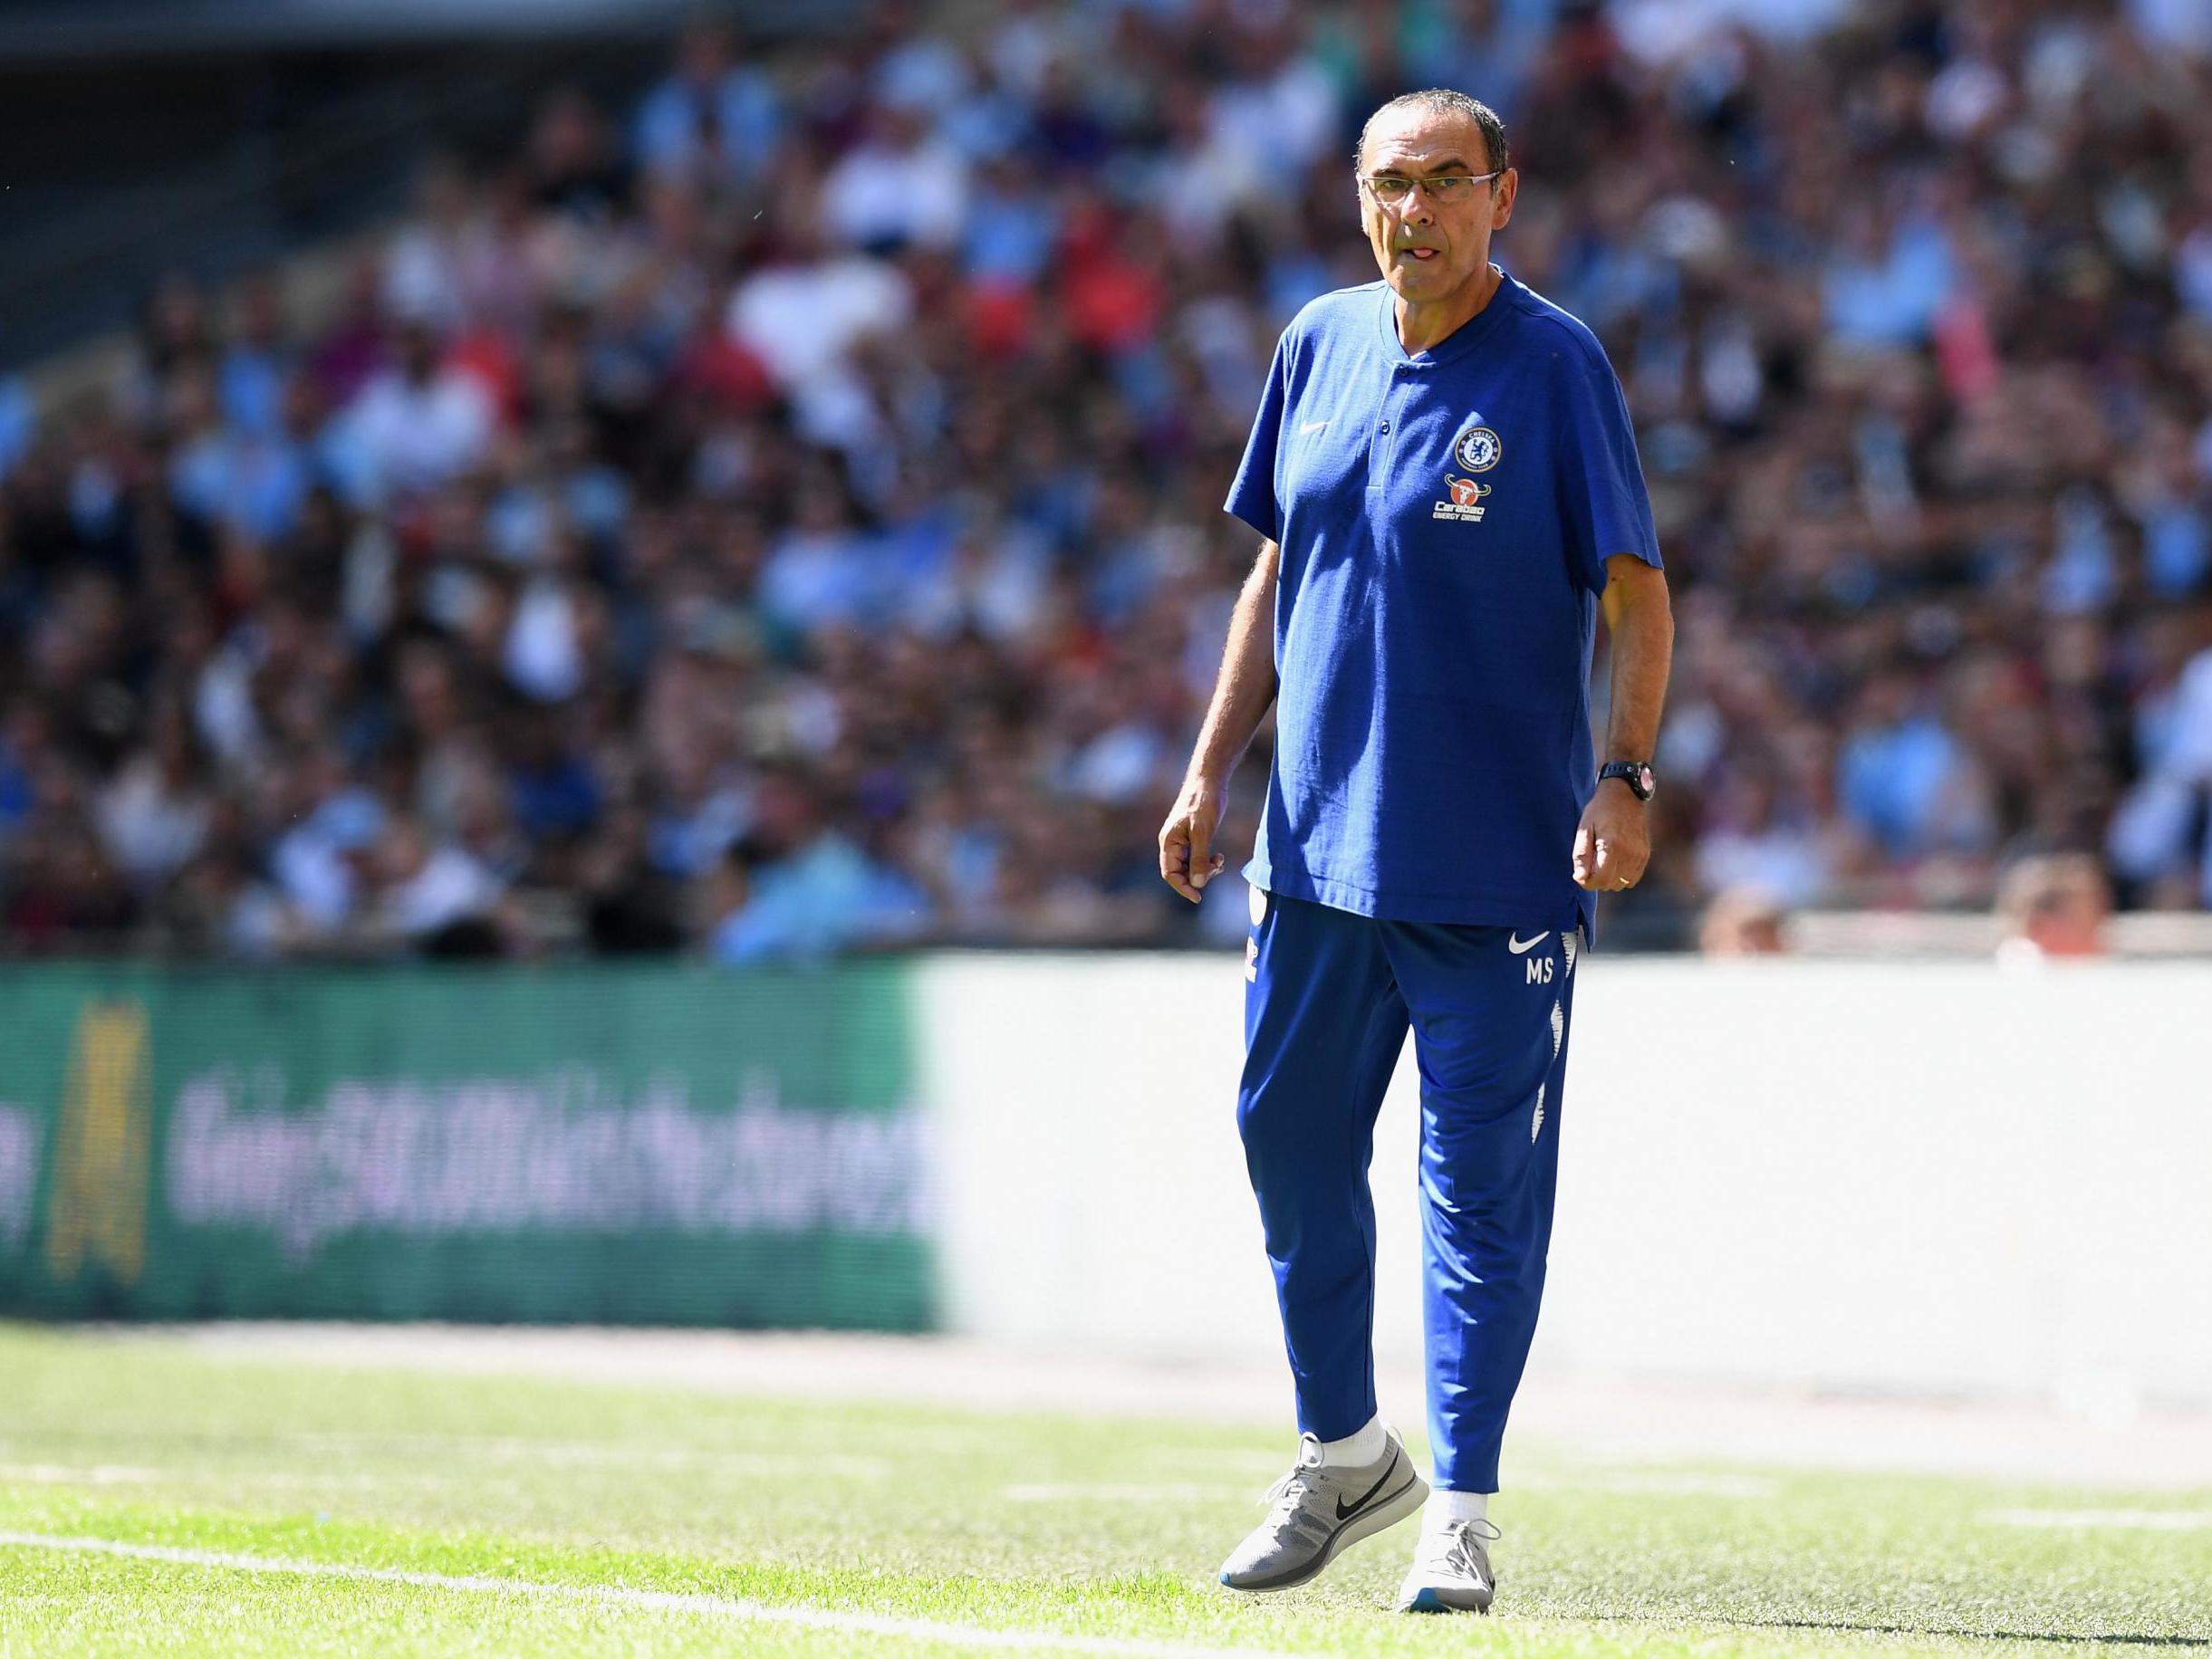 Maurizio Sarri's tracksuit has attracted almost as much coverage as his decision to ditch Antonio Conte’s back five